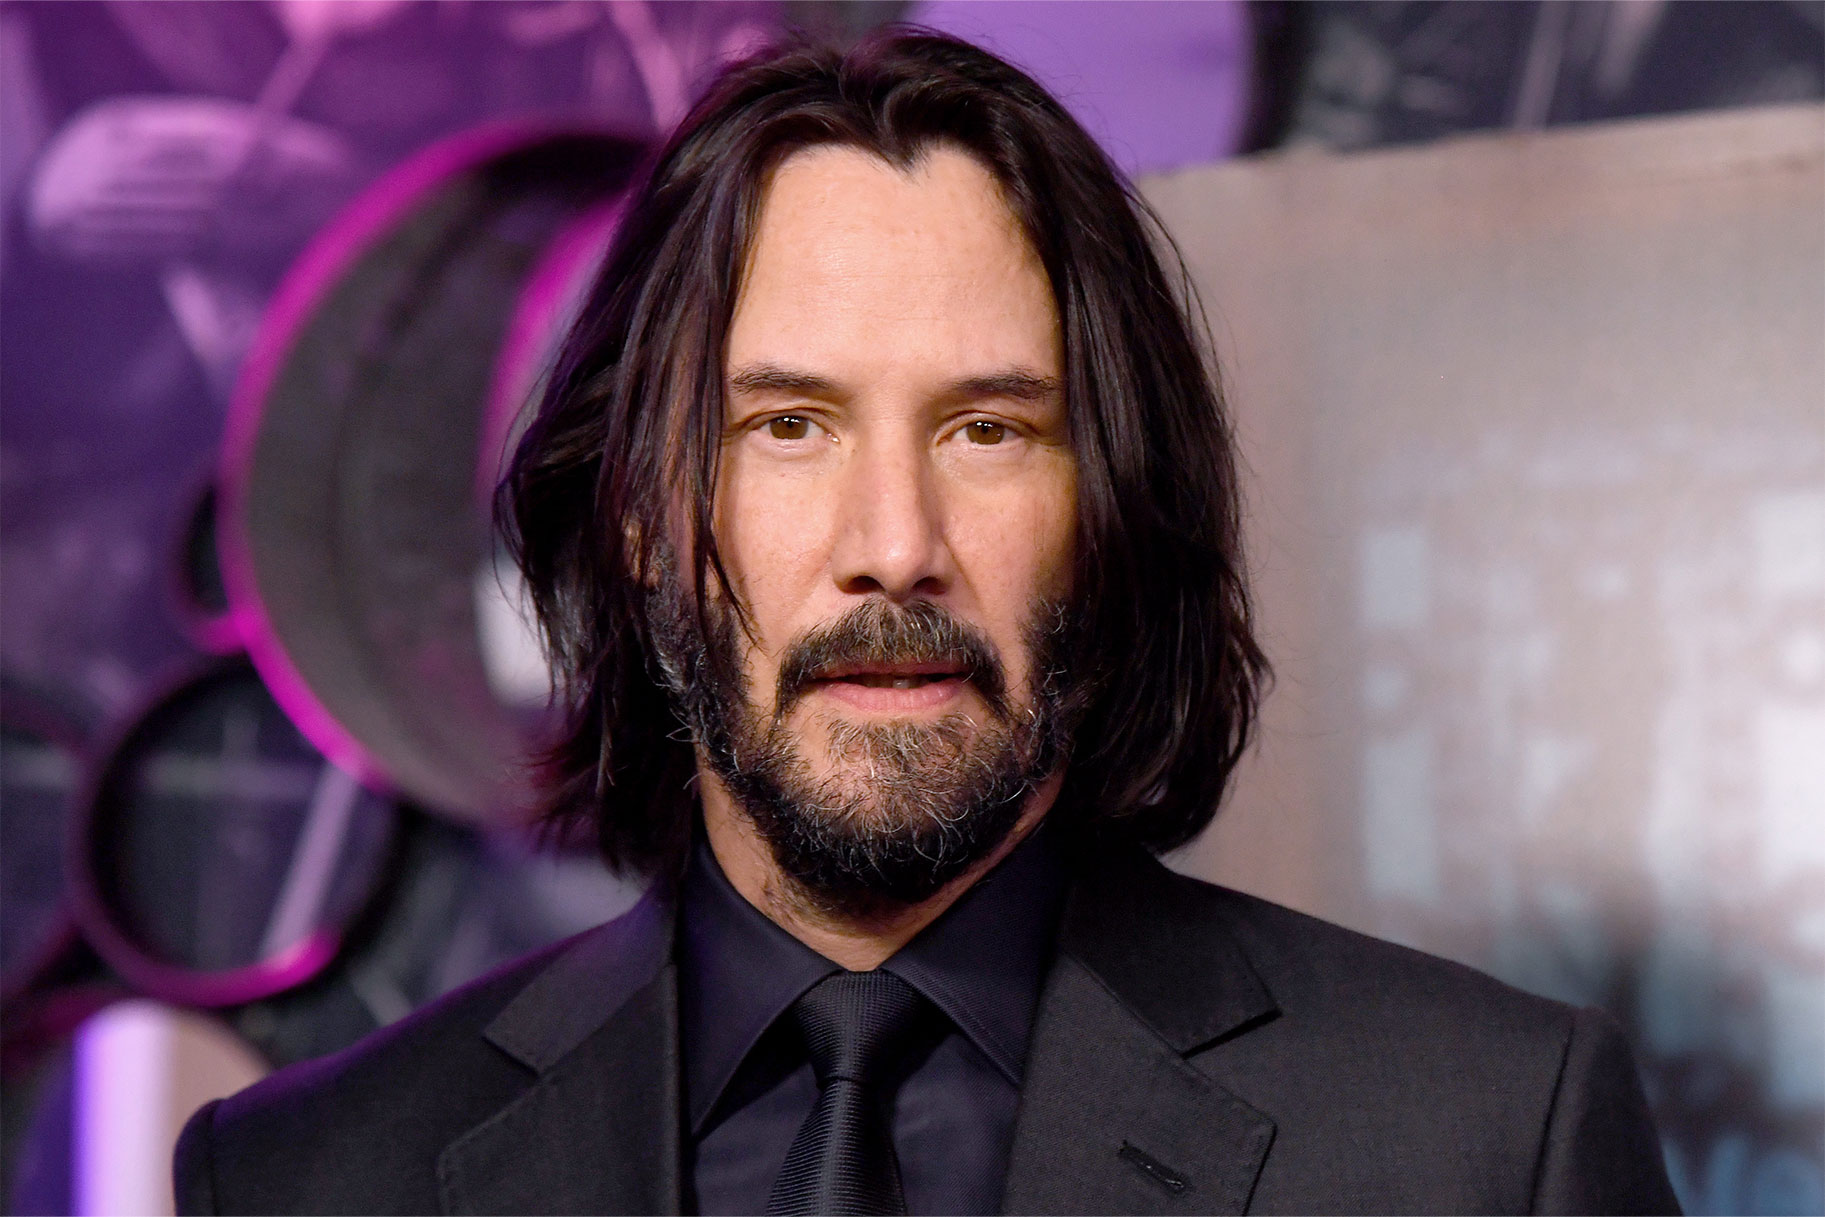 John Wick: Chapter 4 - Where to Watch and Stream - TV Guide